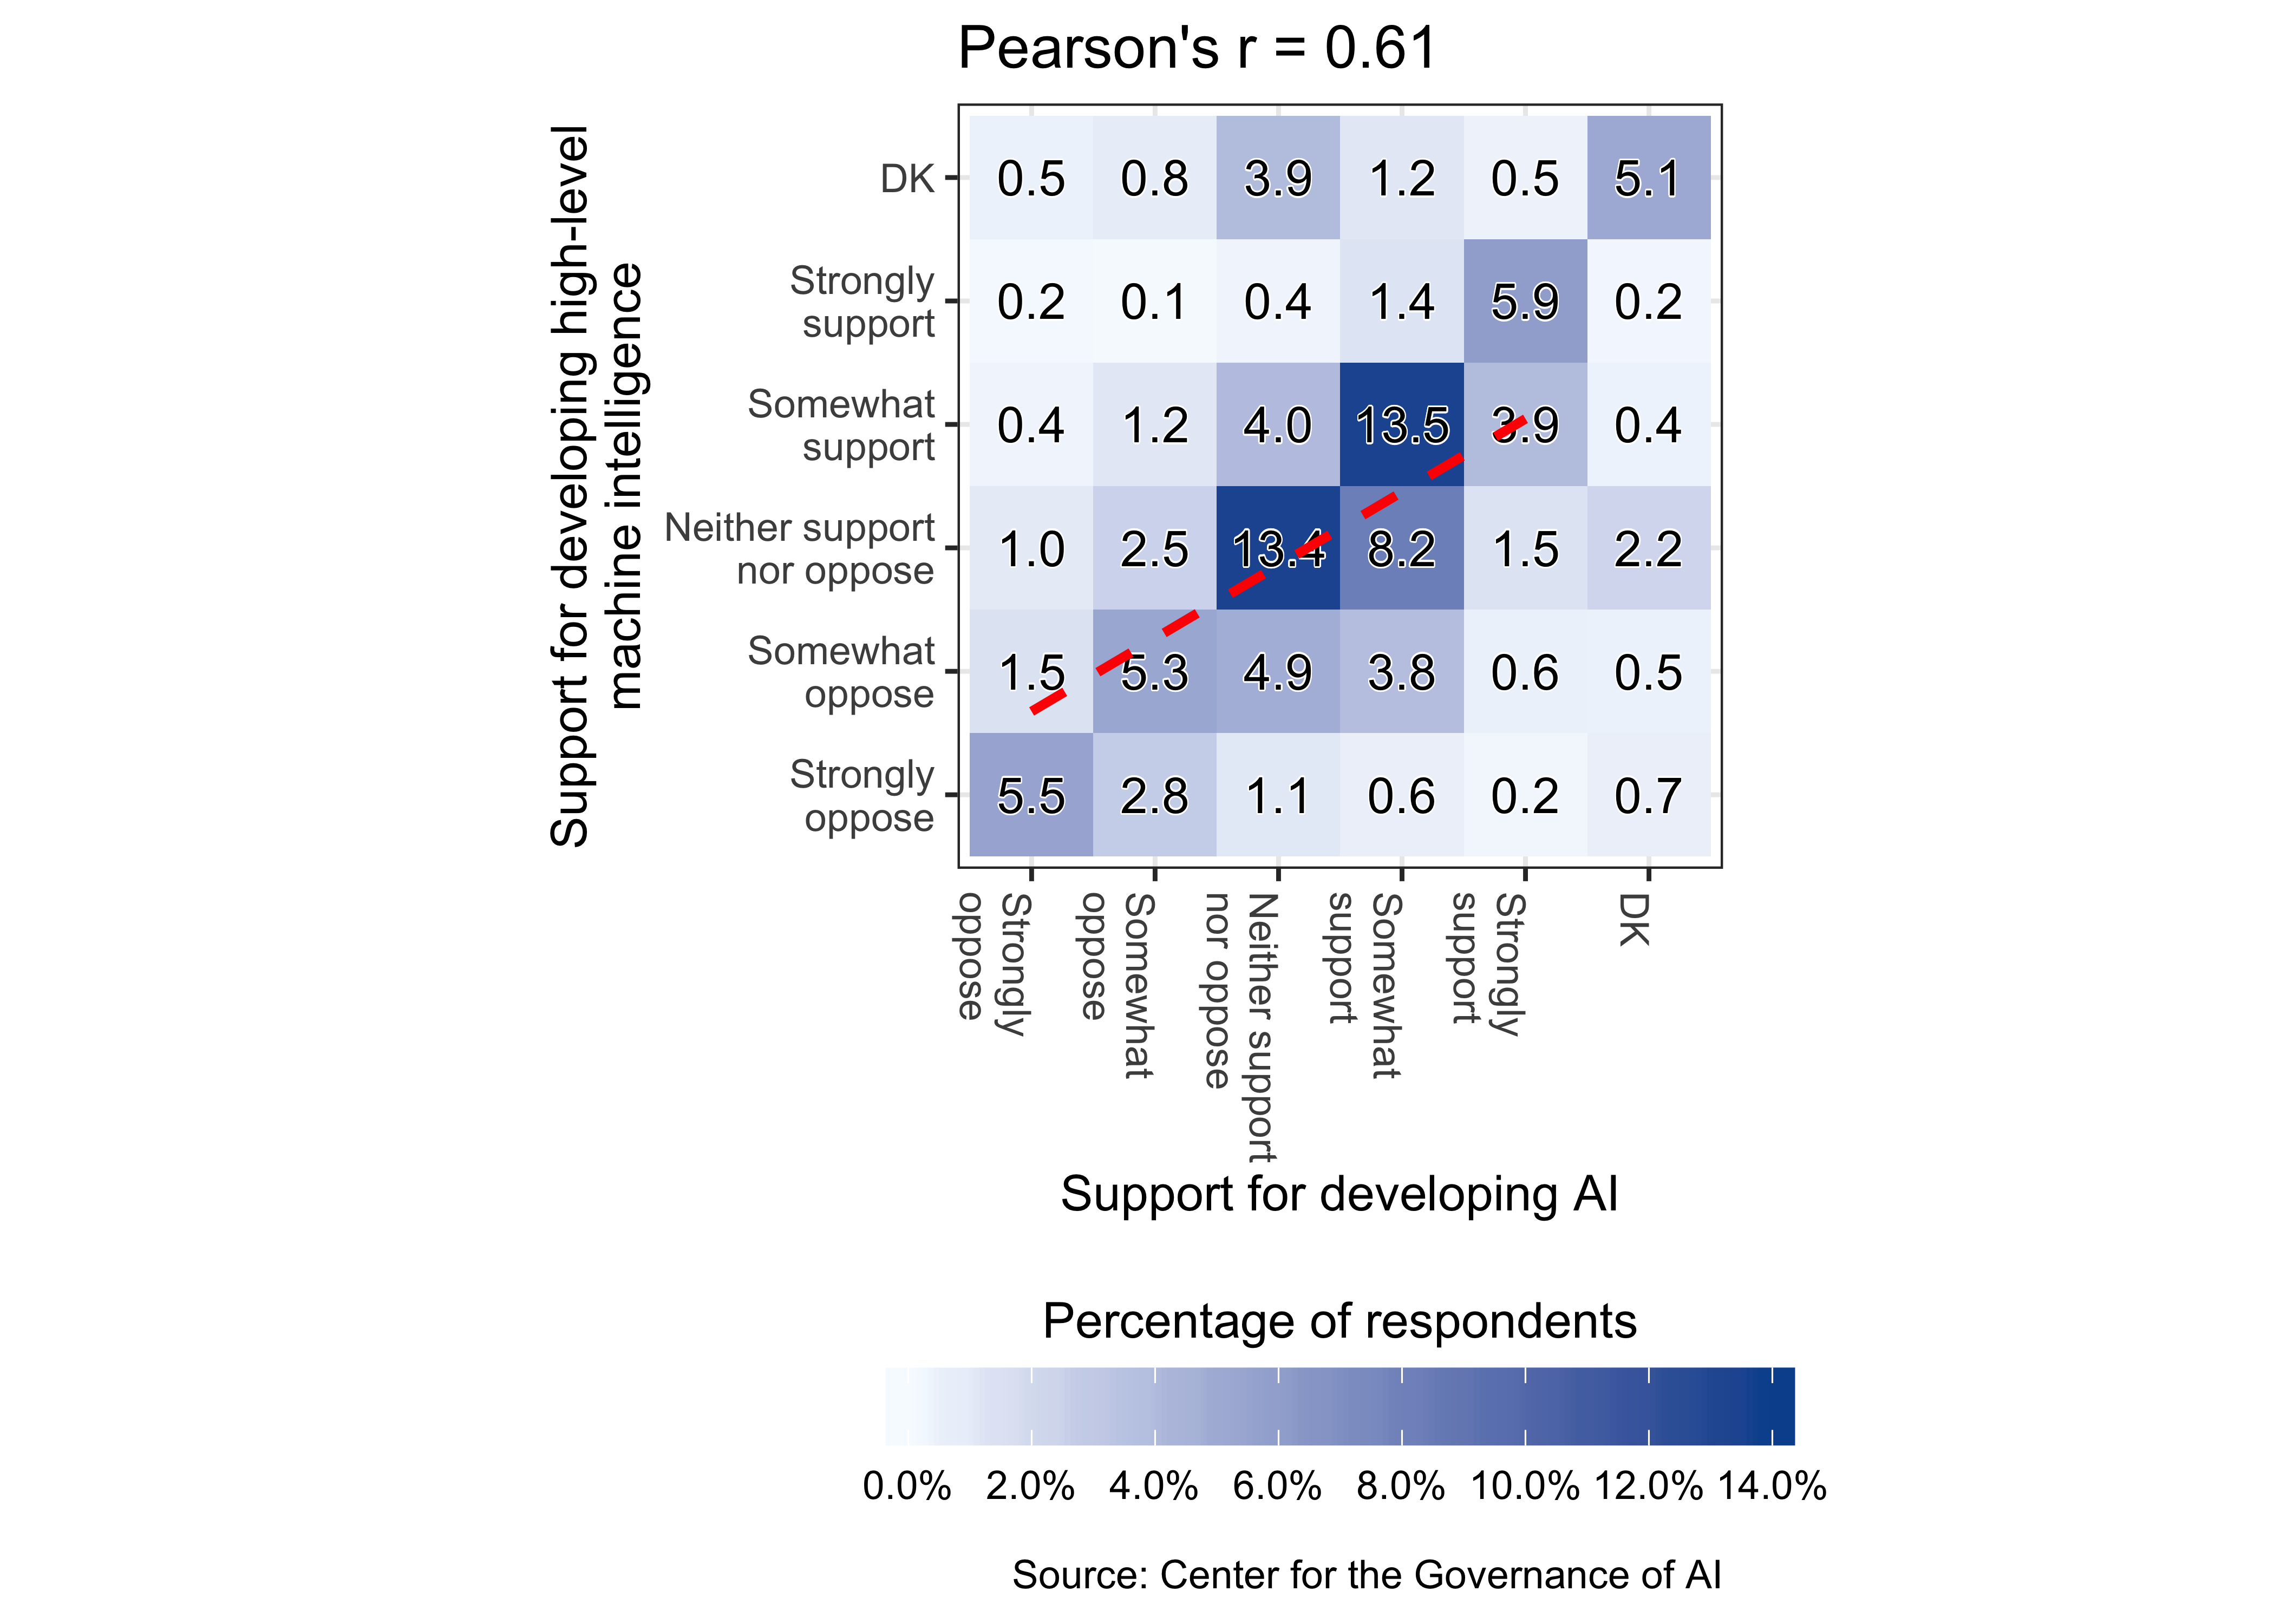 Correlation between support for developing AI and support for developing high-level machine intelligence